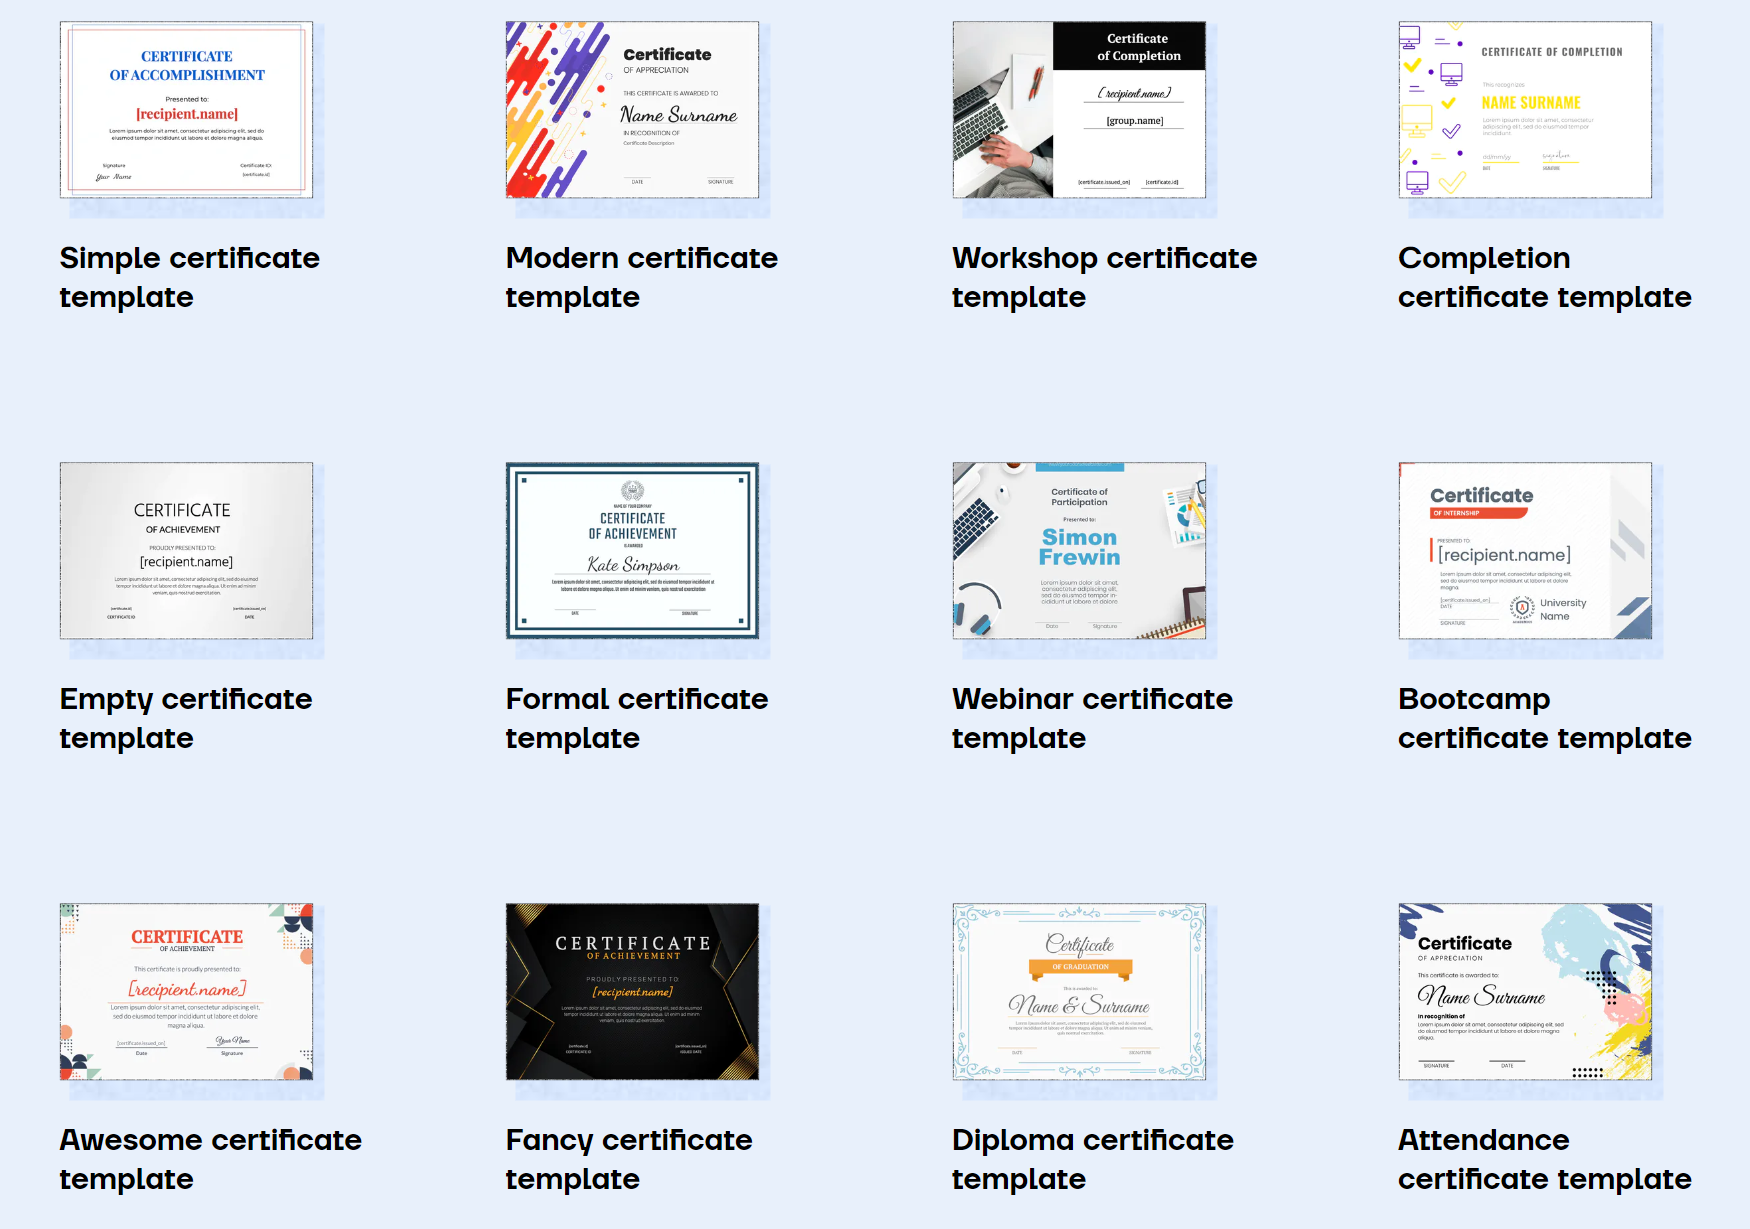 Certifier templates for different types of certificates.